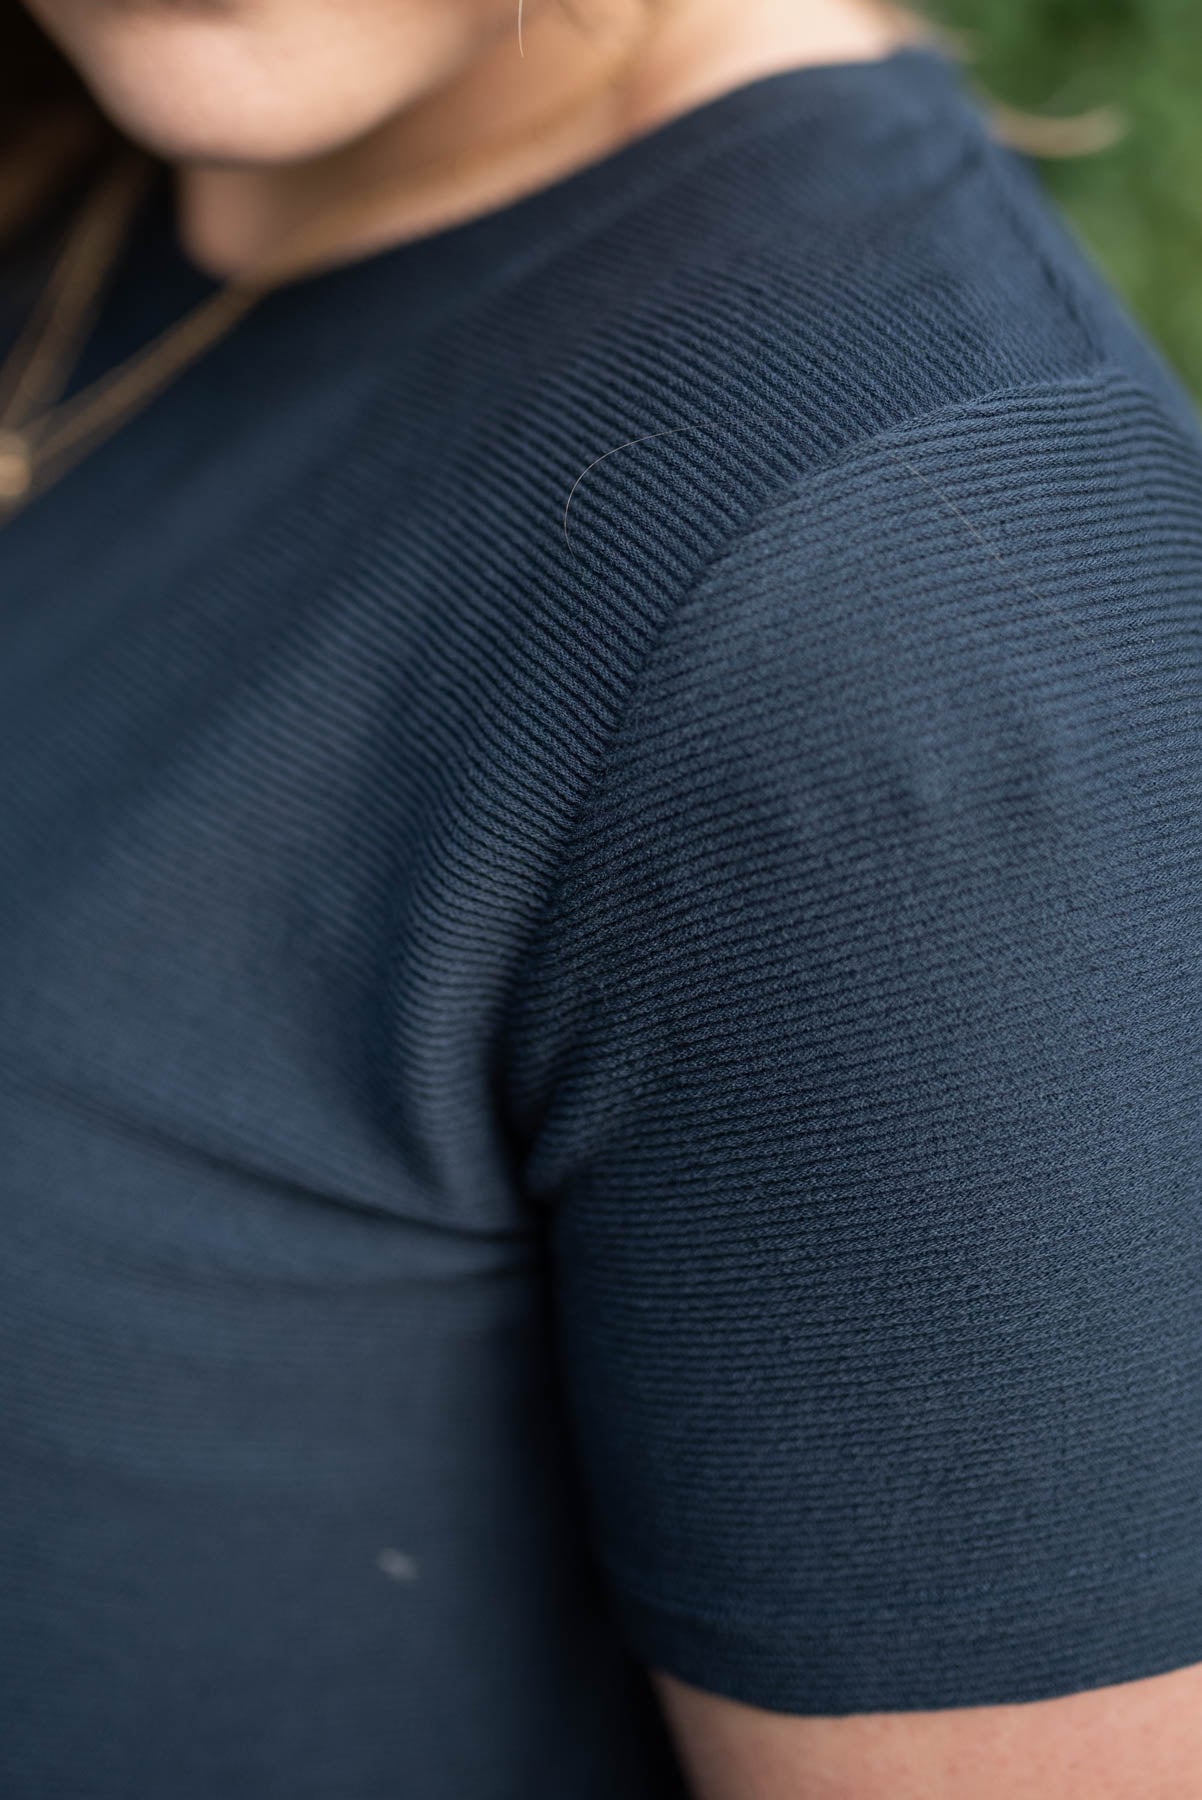 Close up of the sleeve on the navy textured top